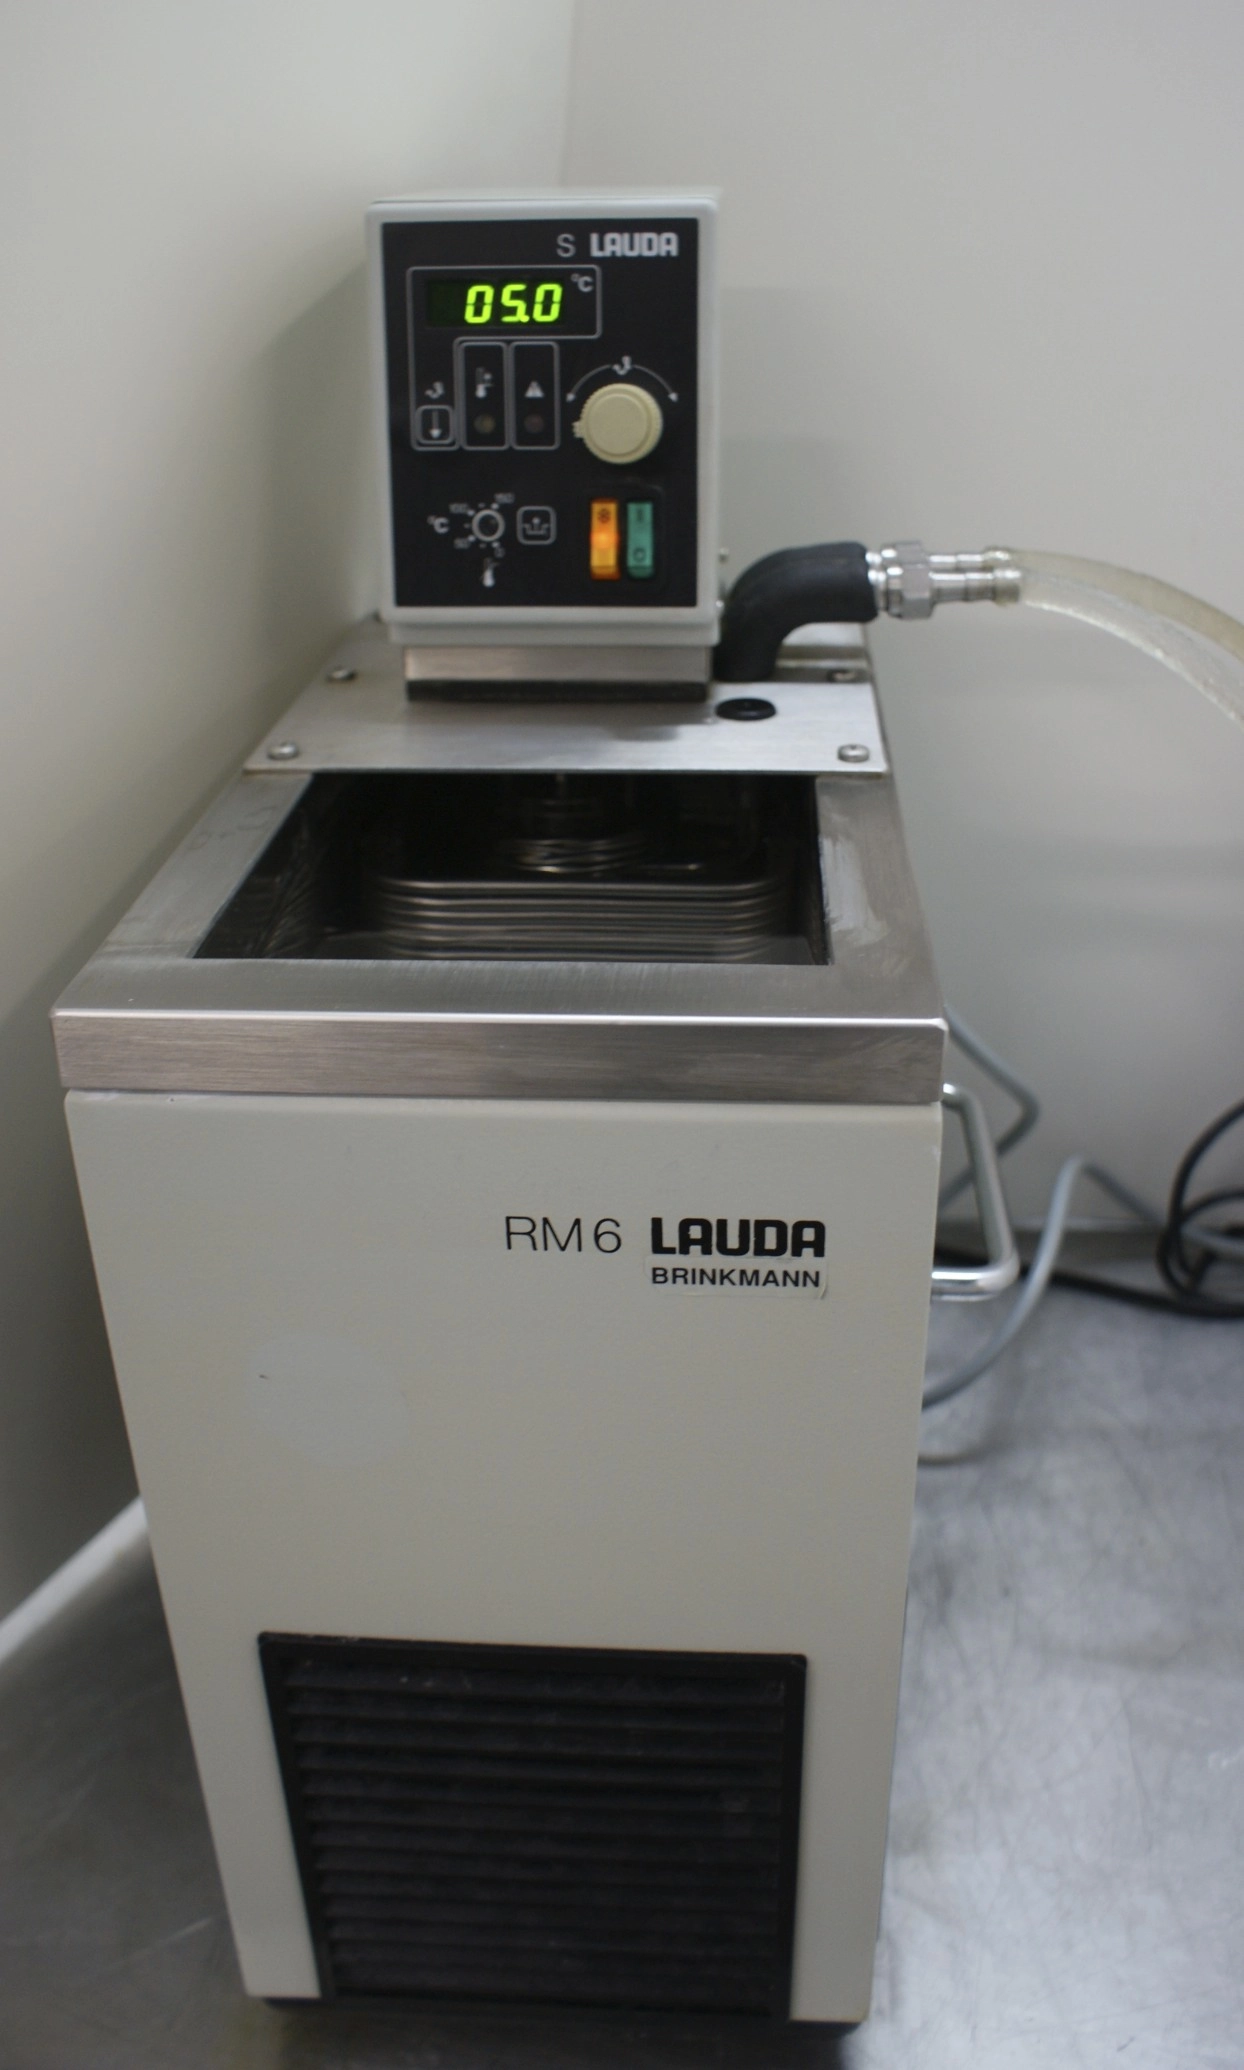 Brinkmann Lauda RM6 Refrigerated Chiller Circulator with RMS Controller